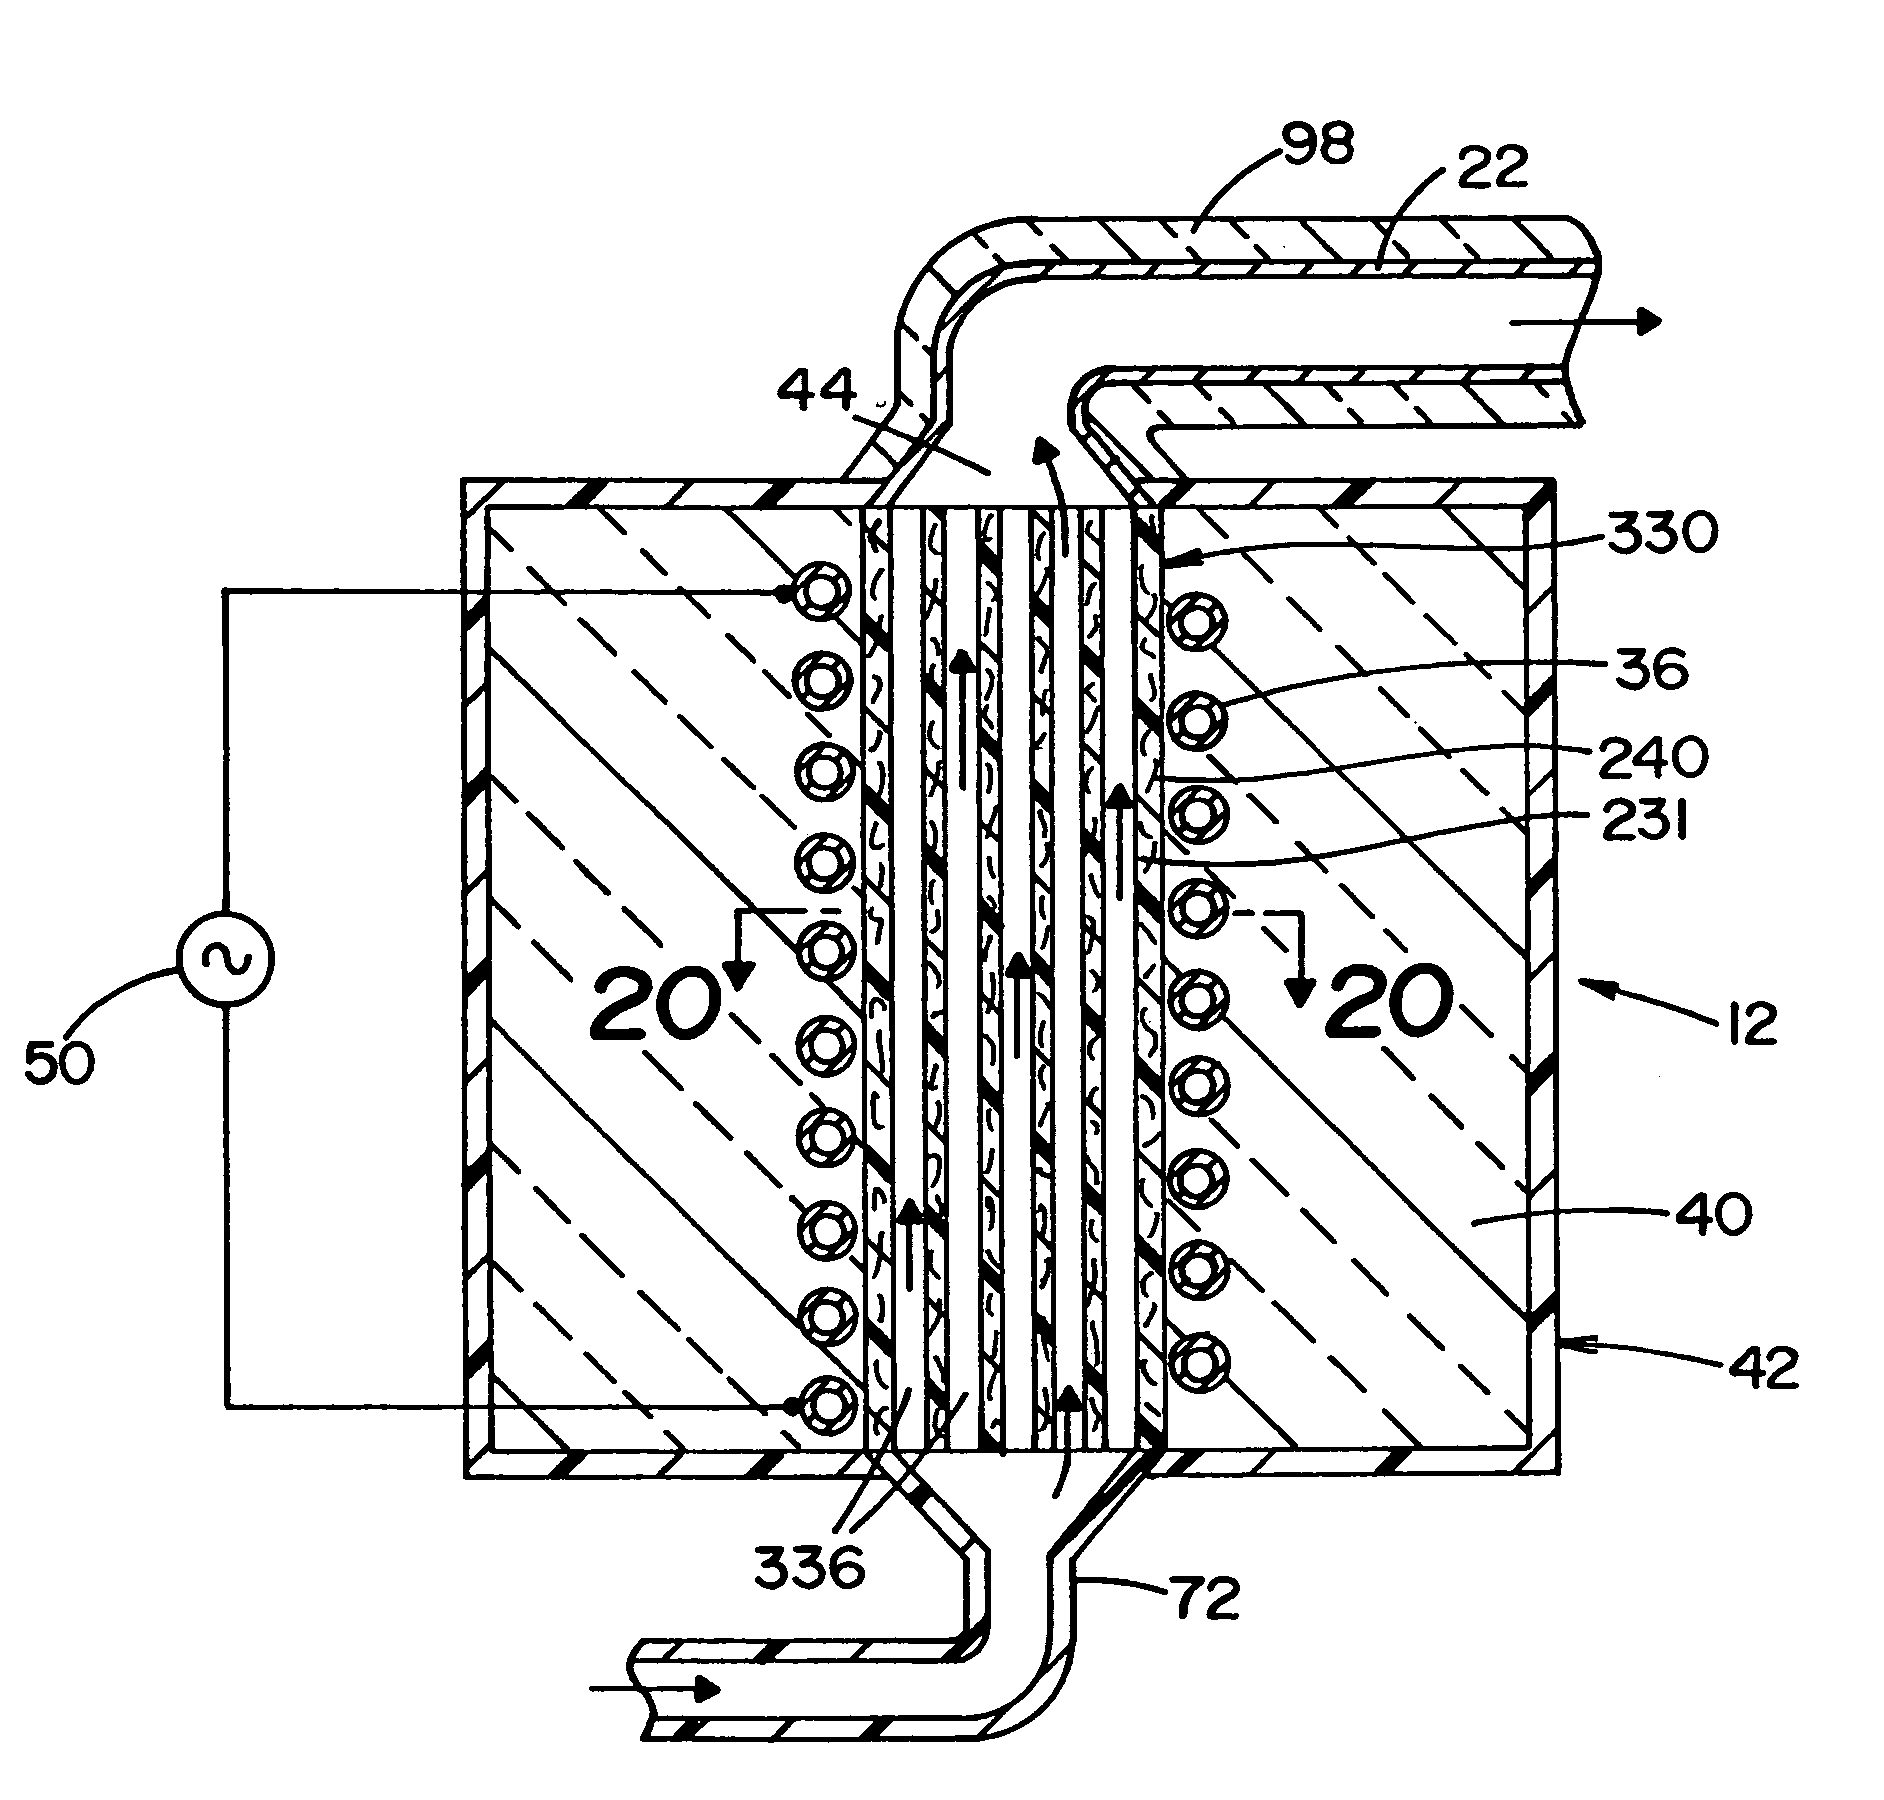 Method for vaporizing a fluid using an electromagnetically responsive heating apparatus